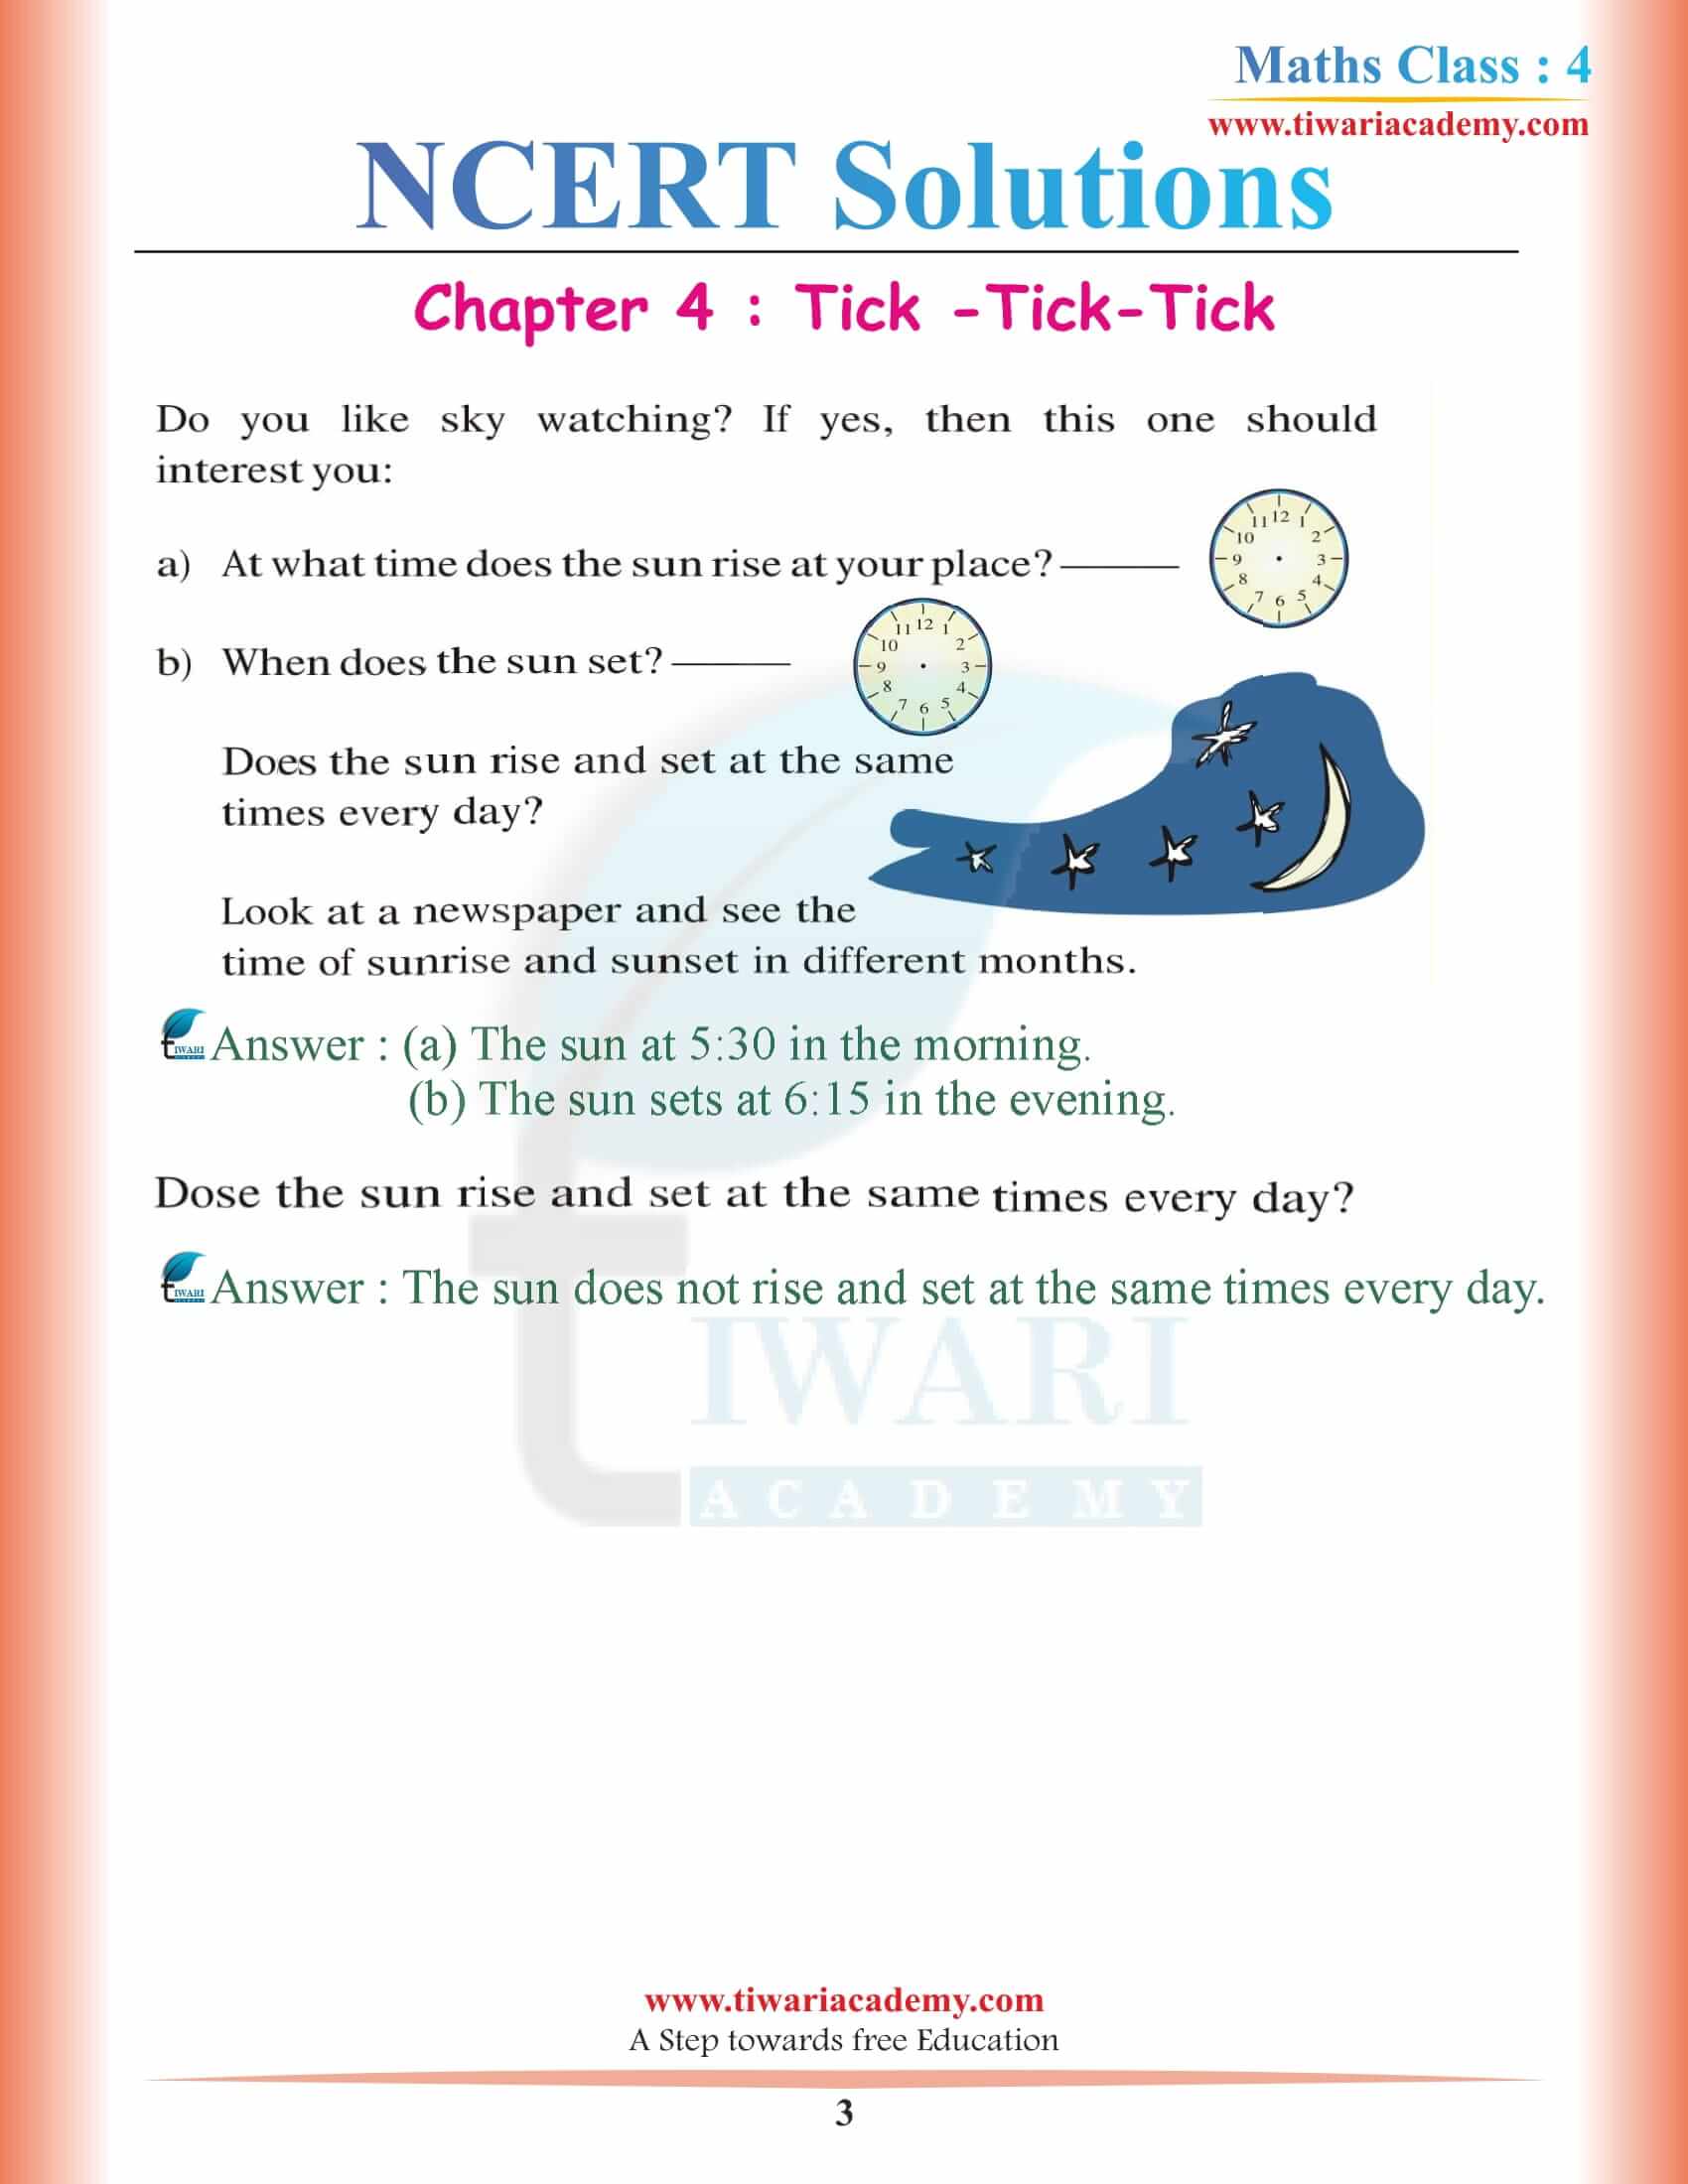 NCERT Solutions for Class 4 Maths Chapter 4 in PDF